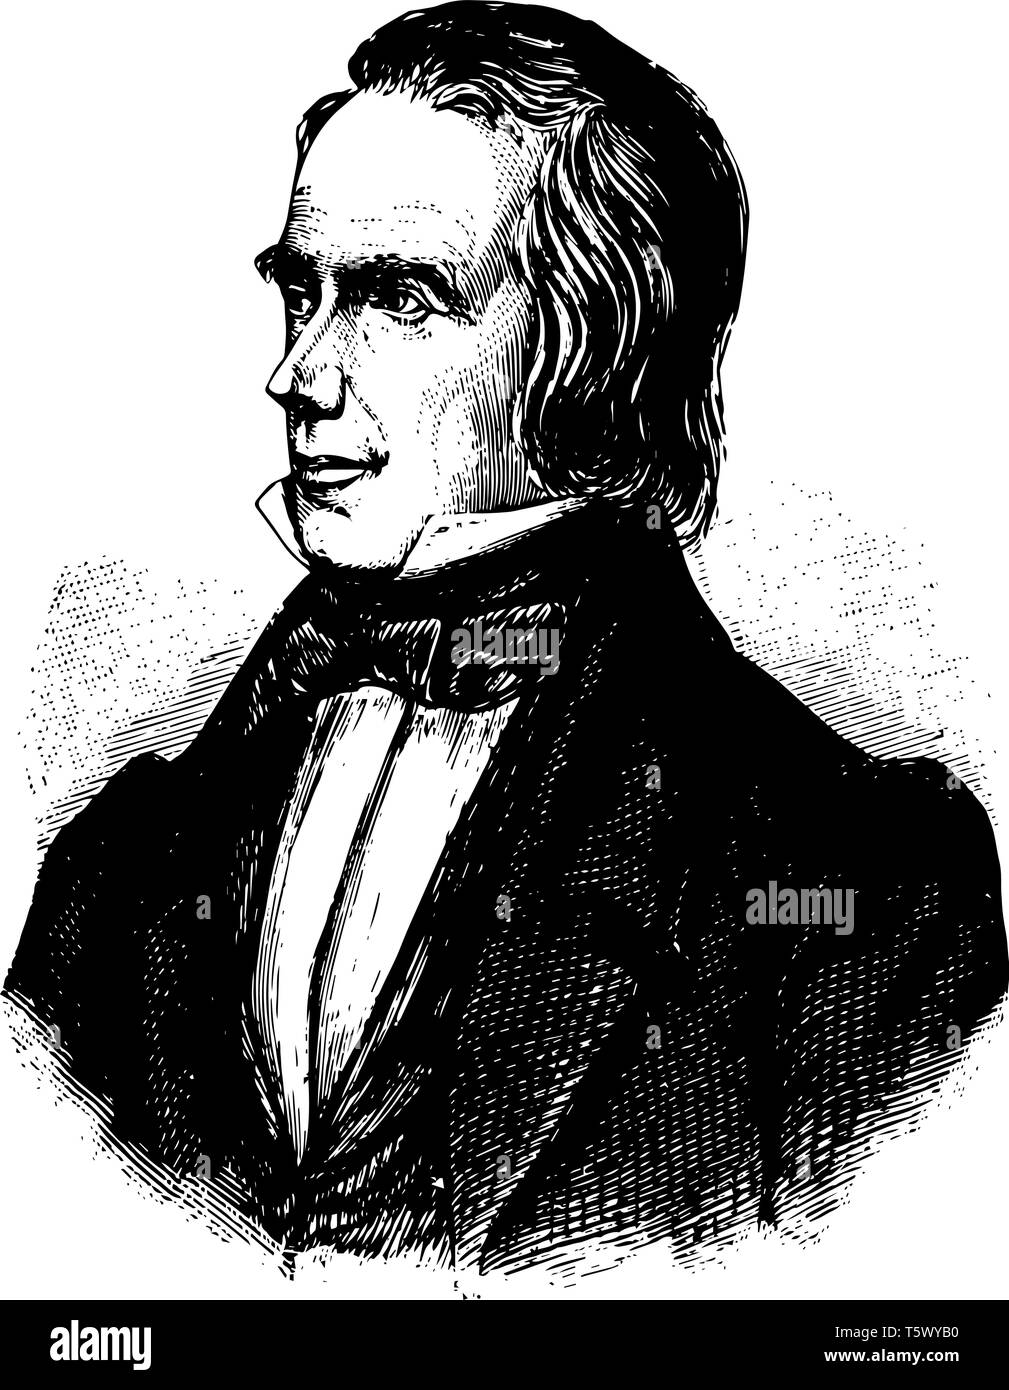 Henry Clay 1777 to 1852 he was an American lawyer statesman skilled orator United States senator from Kentucky and speaker of U.S. house of representa Stock Vector